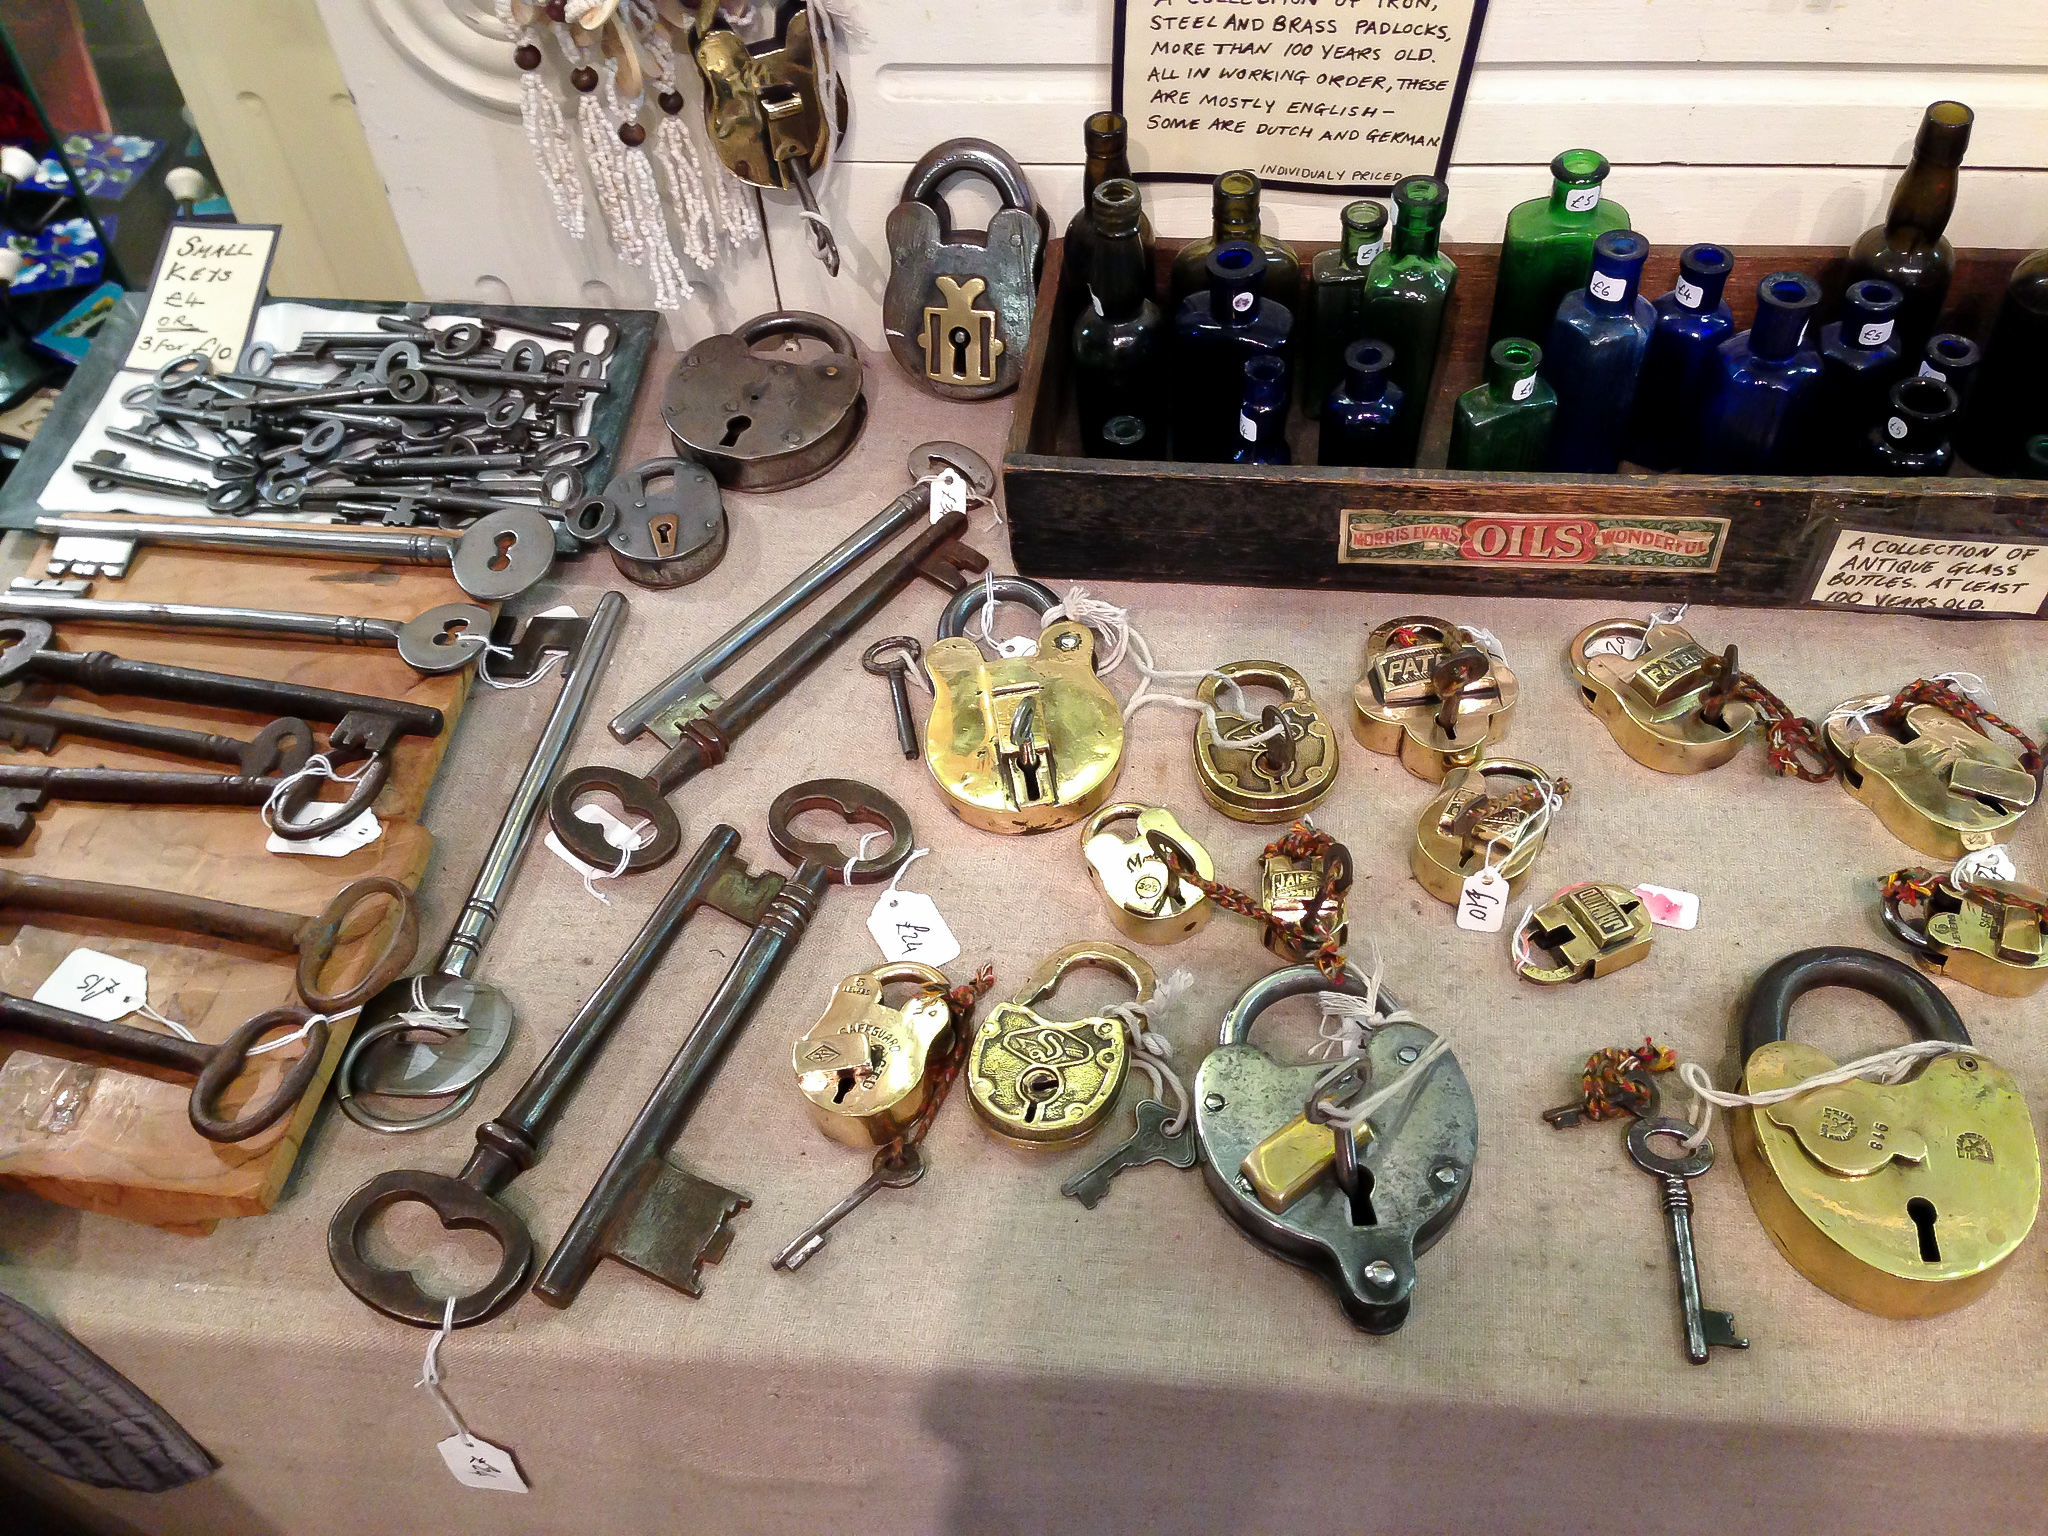 Vintage keys and locks at Chloe Alberry in London. Photo by alphacityguides.